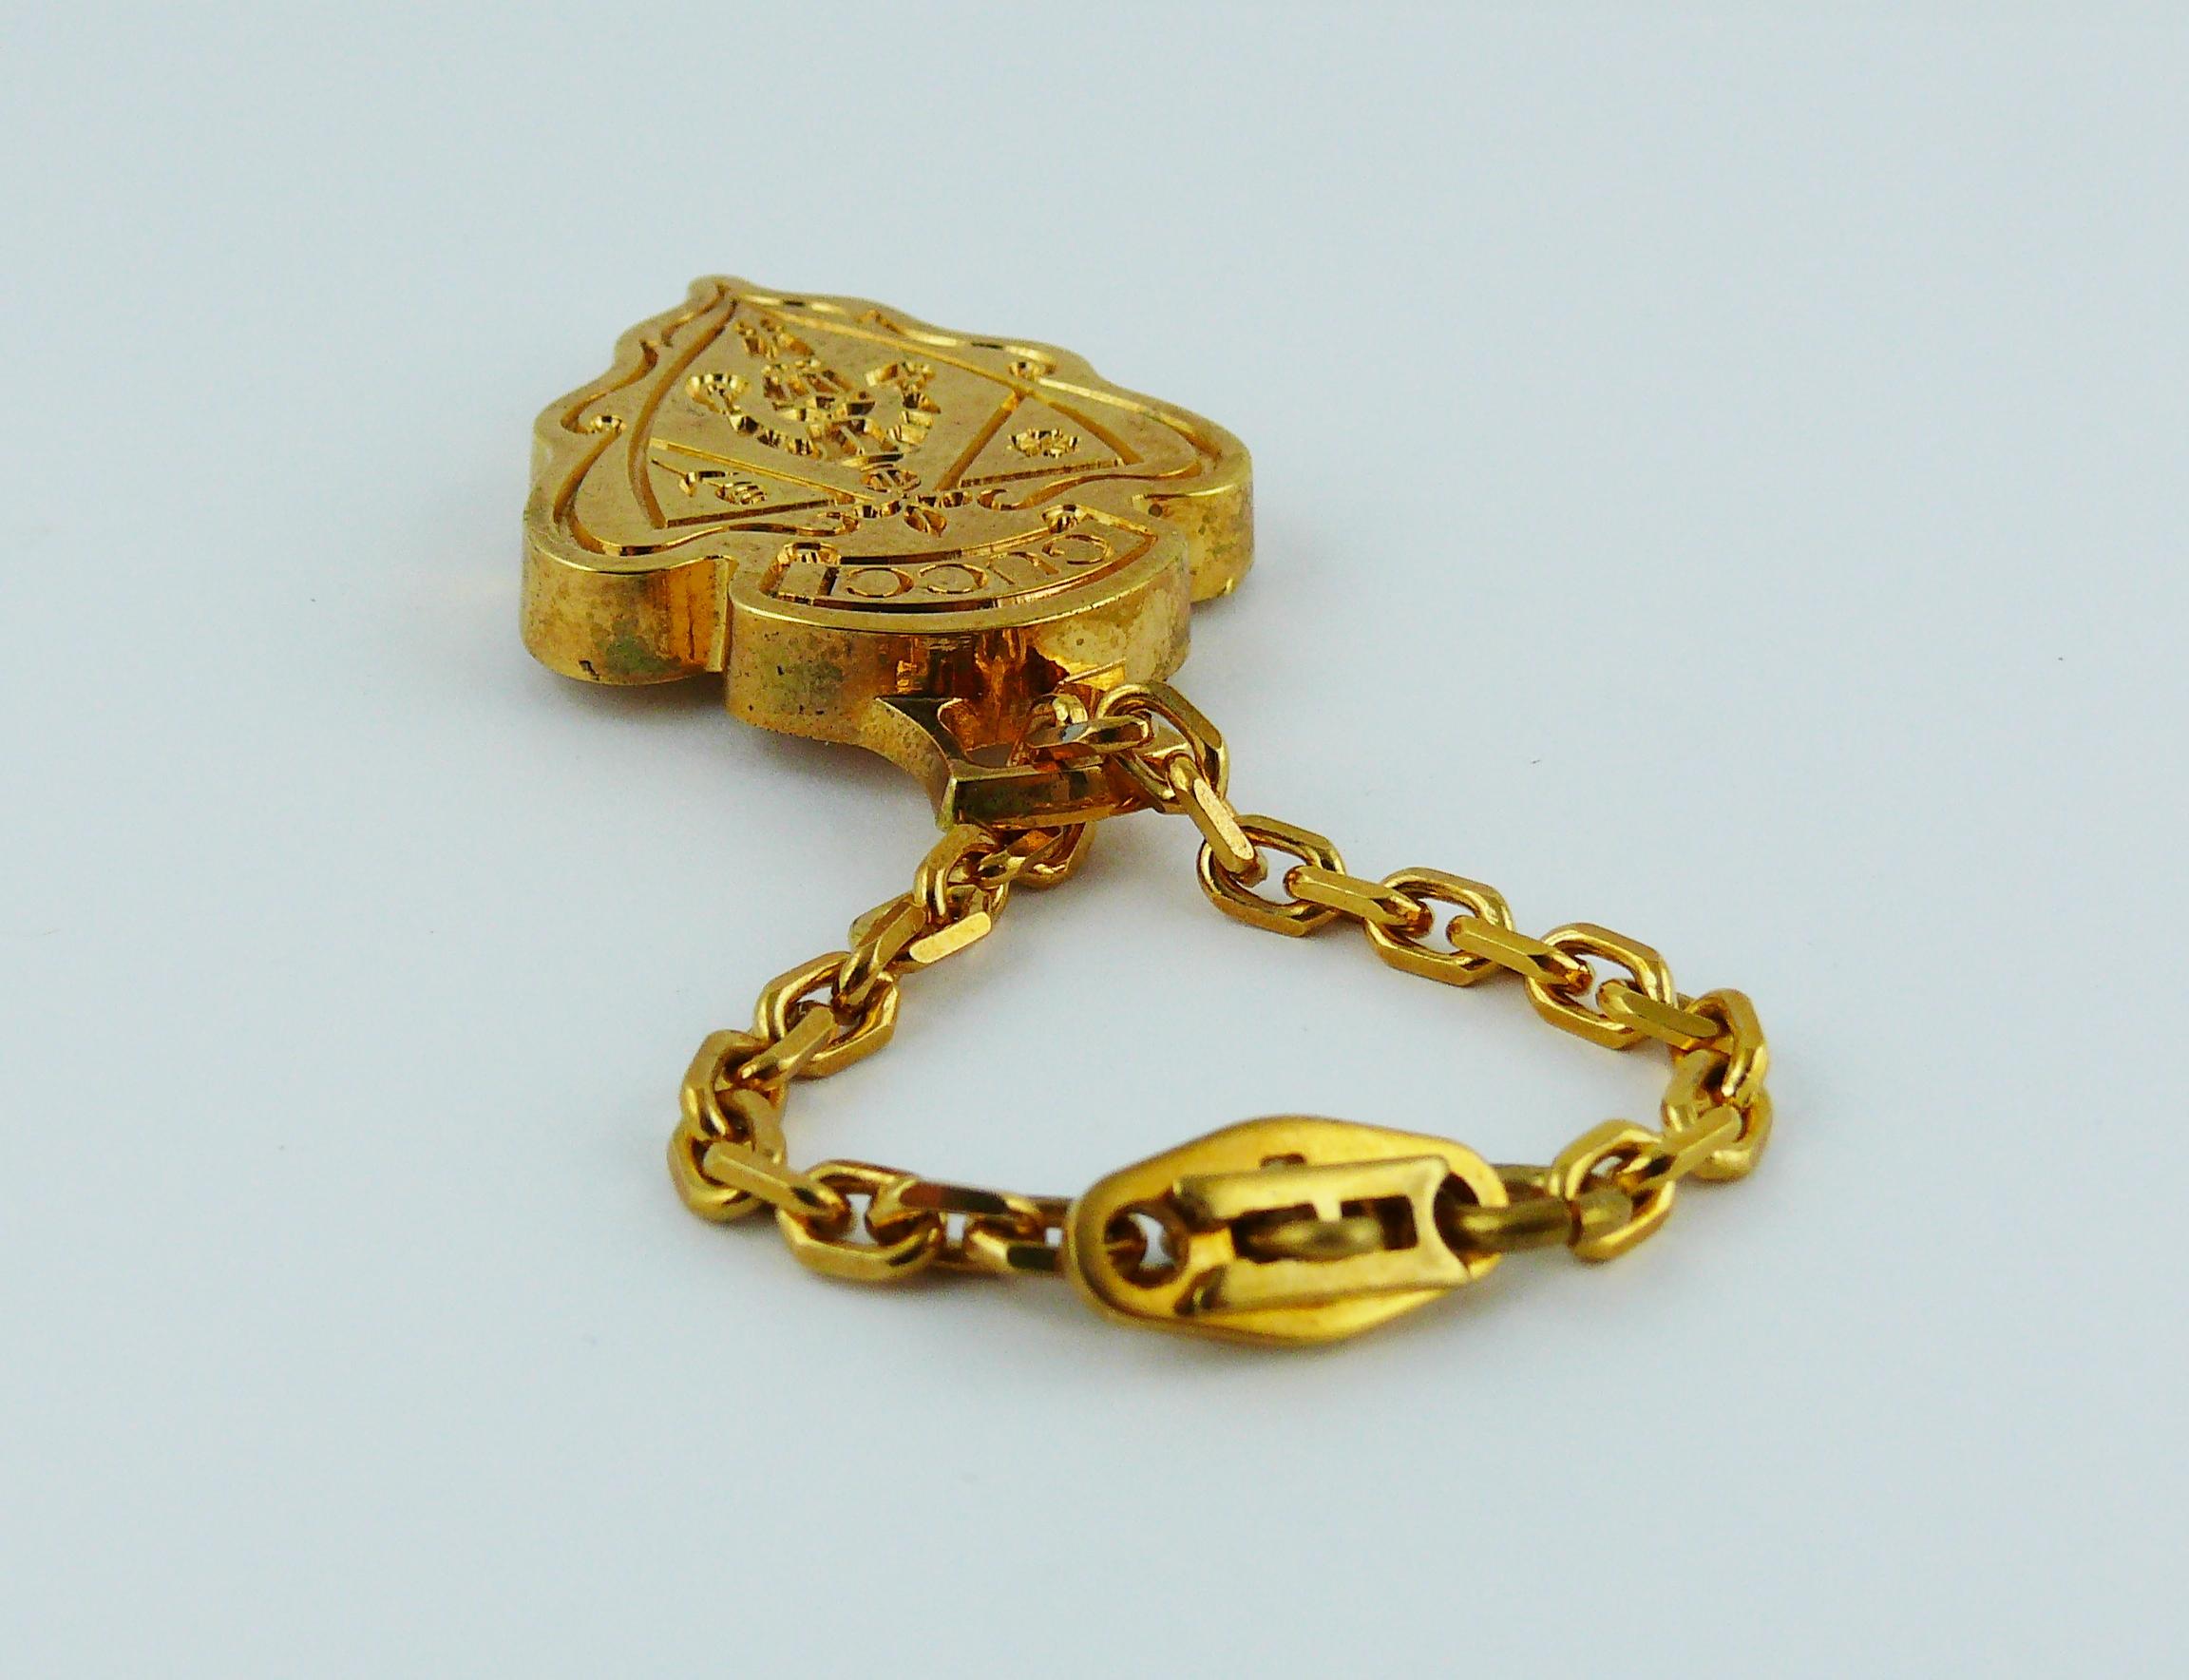 Gucci Vintage Gold Toned Crest Accessory 1